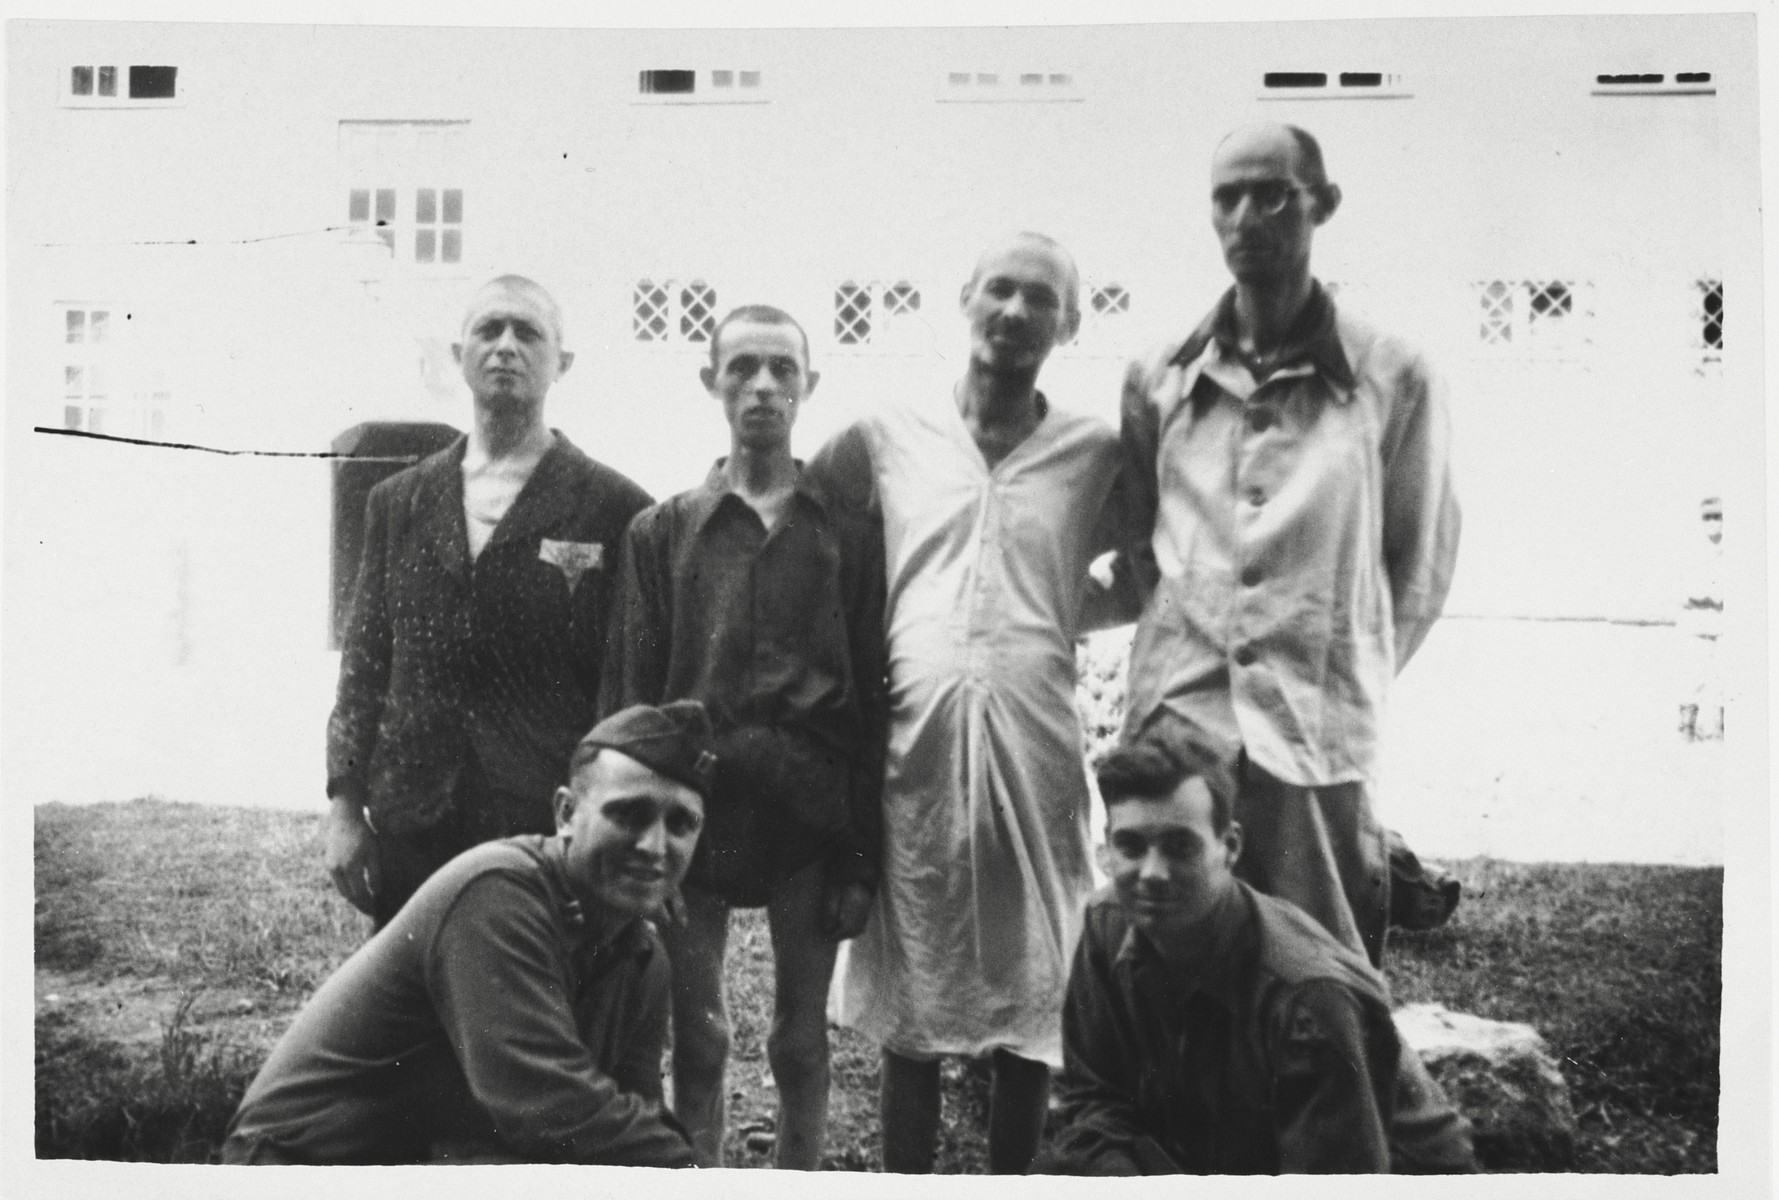 Four survivors of Dachau and Buchenwald pose with Pfc. Robert Kenser and another U.S. soldier at a medical facility in Garmisch-Partenkirchen, where they have come to convalesce.